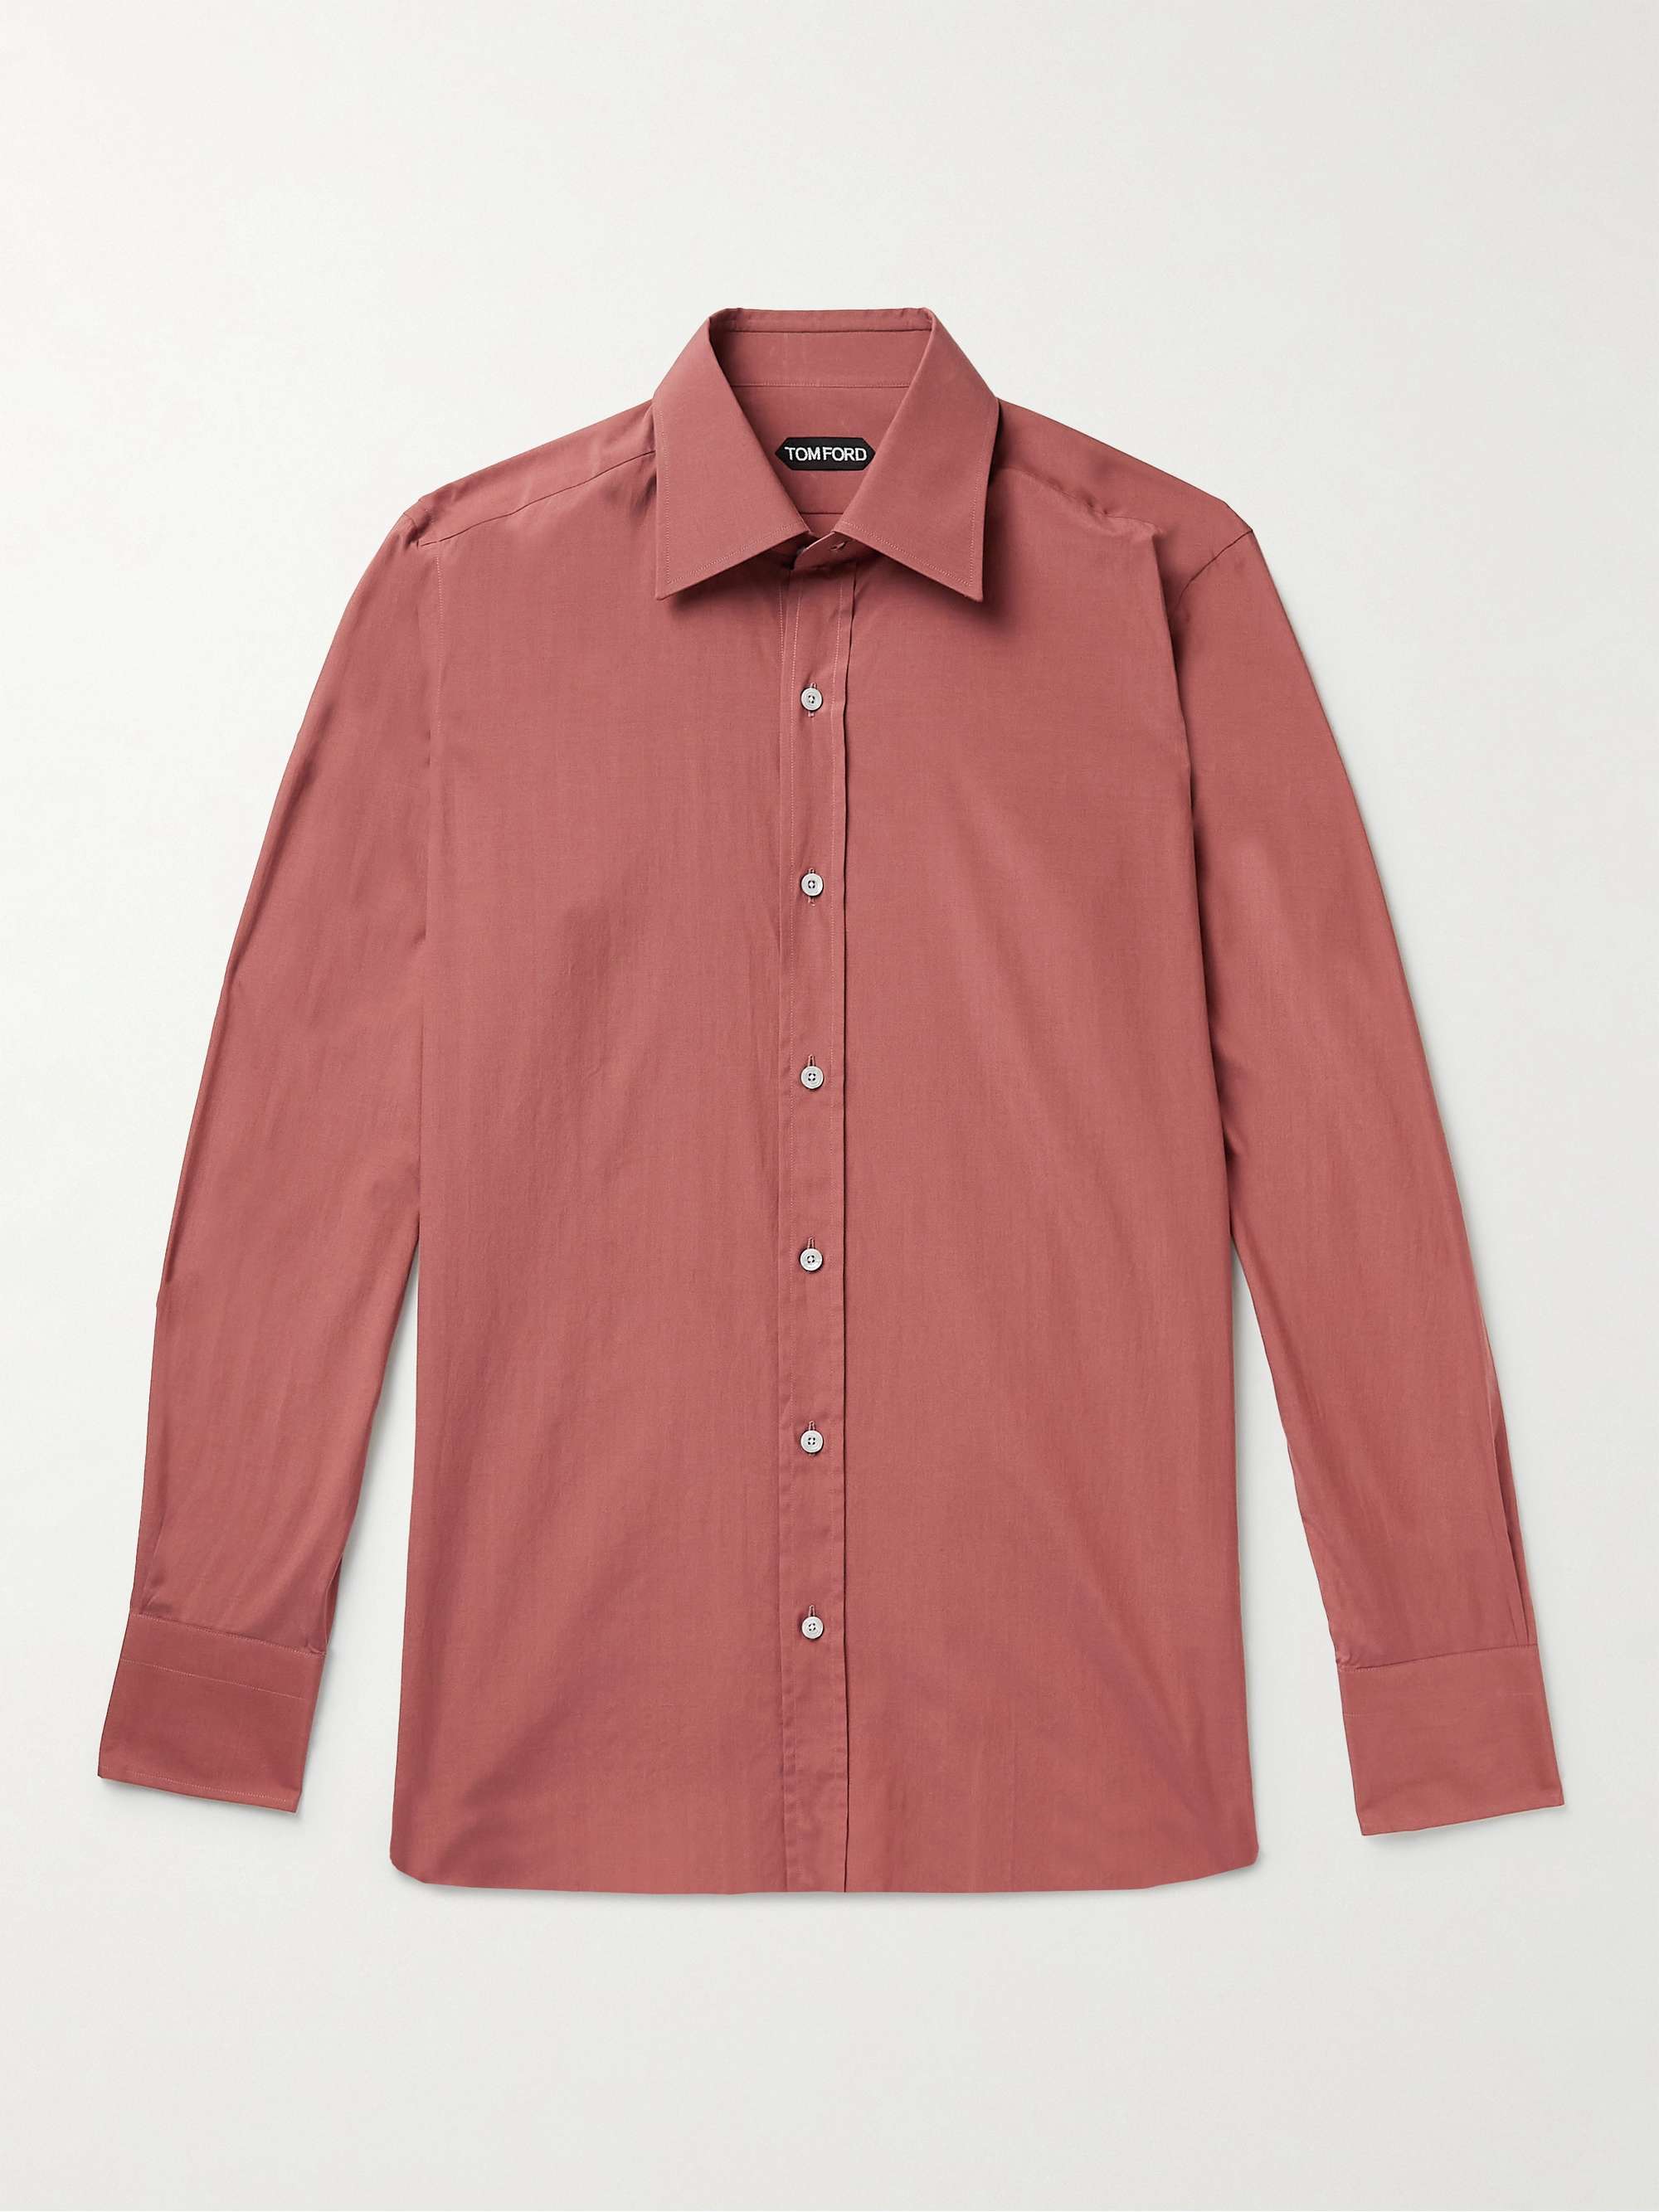 TOM FORD Slim-Fit Button-Down Collar Silk and Cotton-Blend Shirt